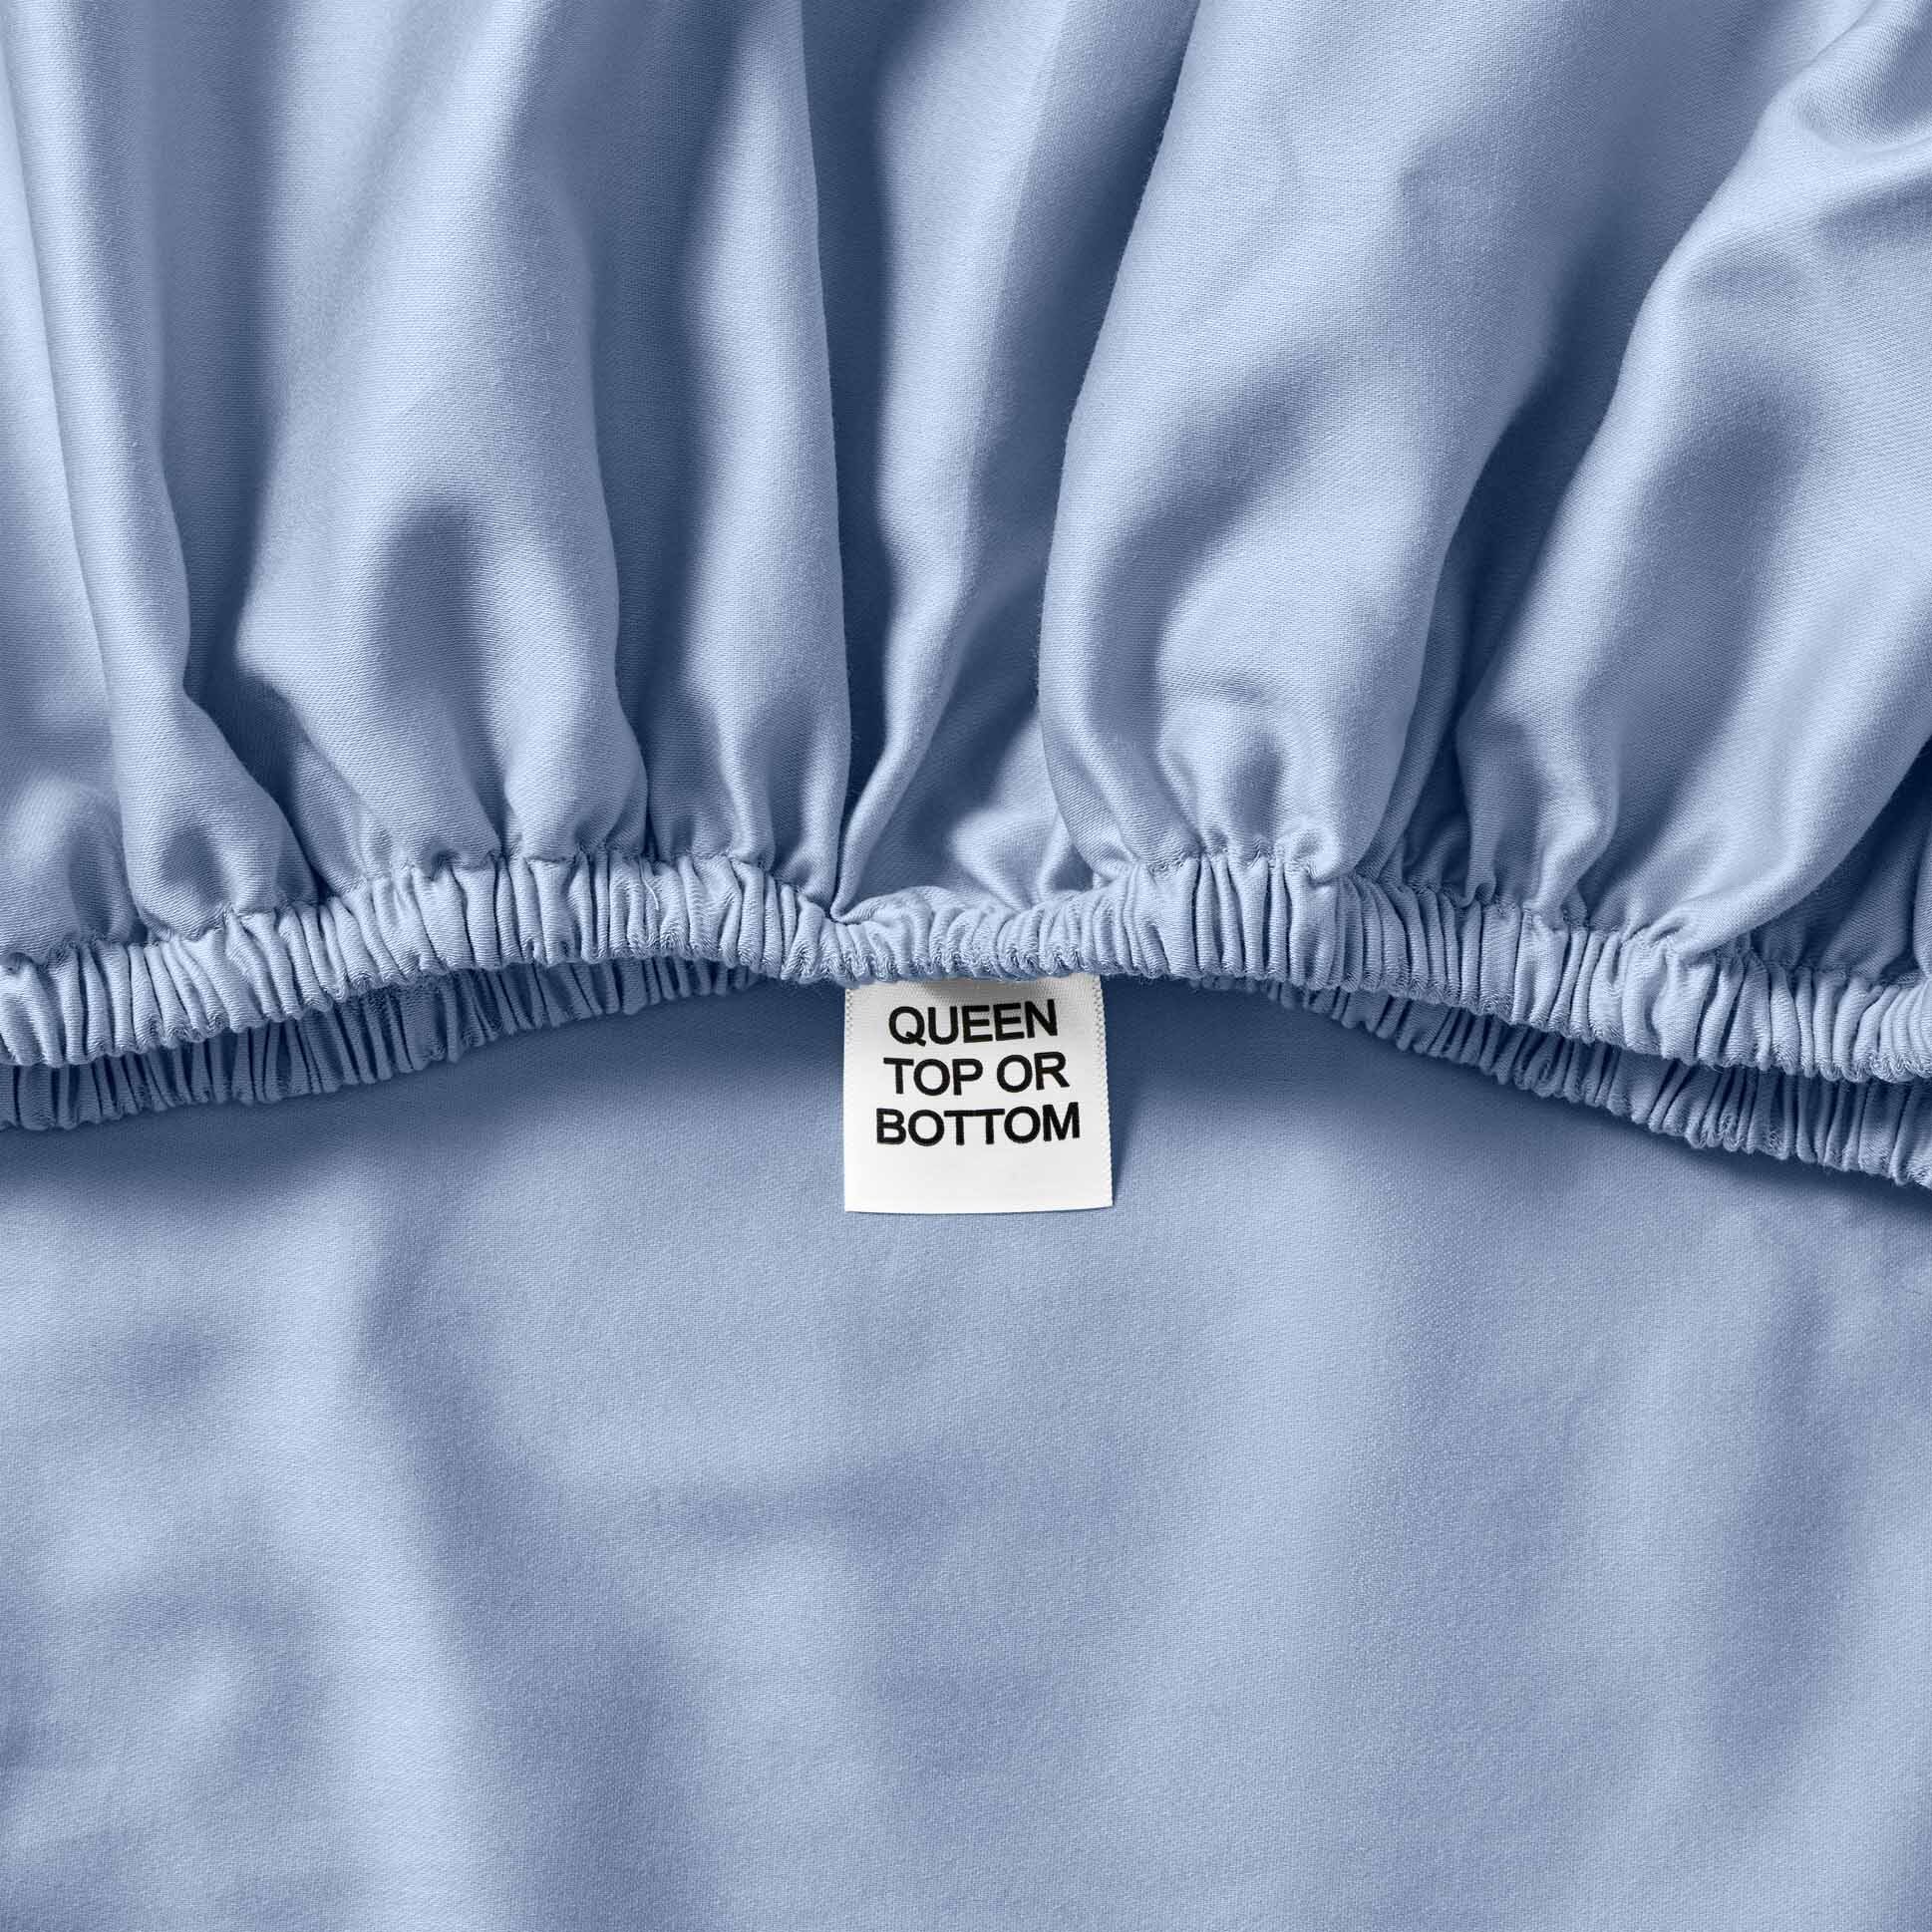 Better Homes & Gardens 100% Cotton Sateen 300 Thread Count Sheet Set, Full, Blue Water - image 3 of 6